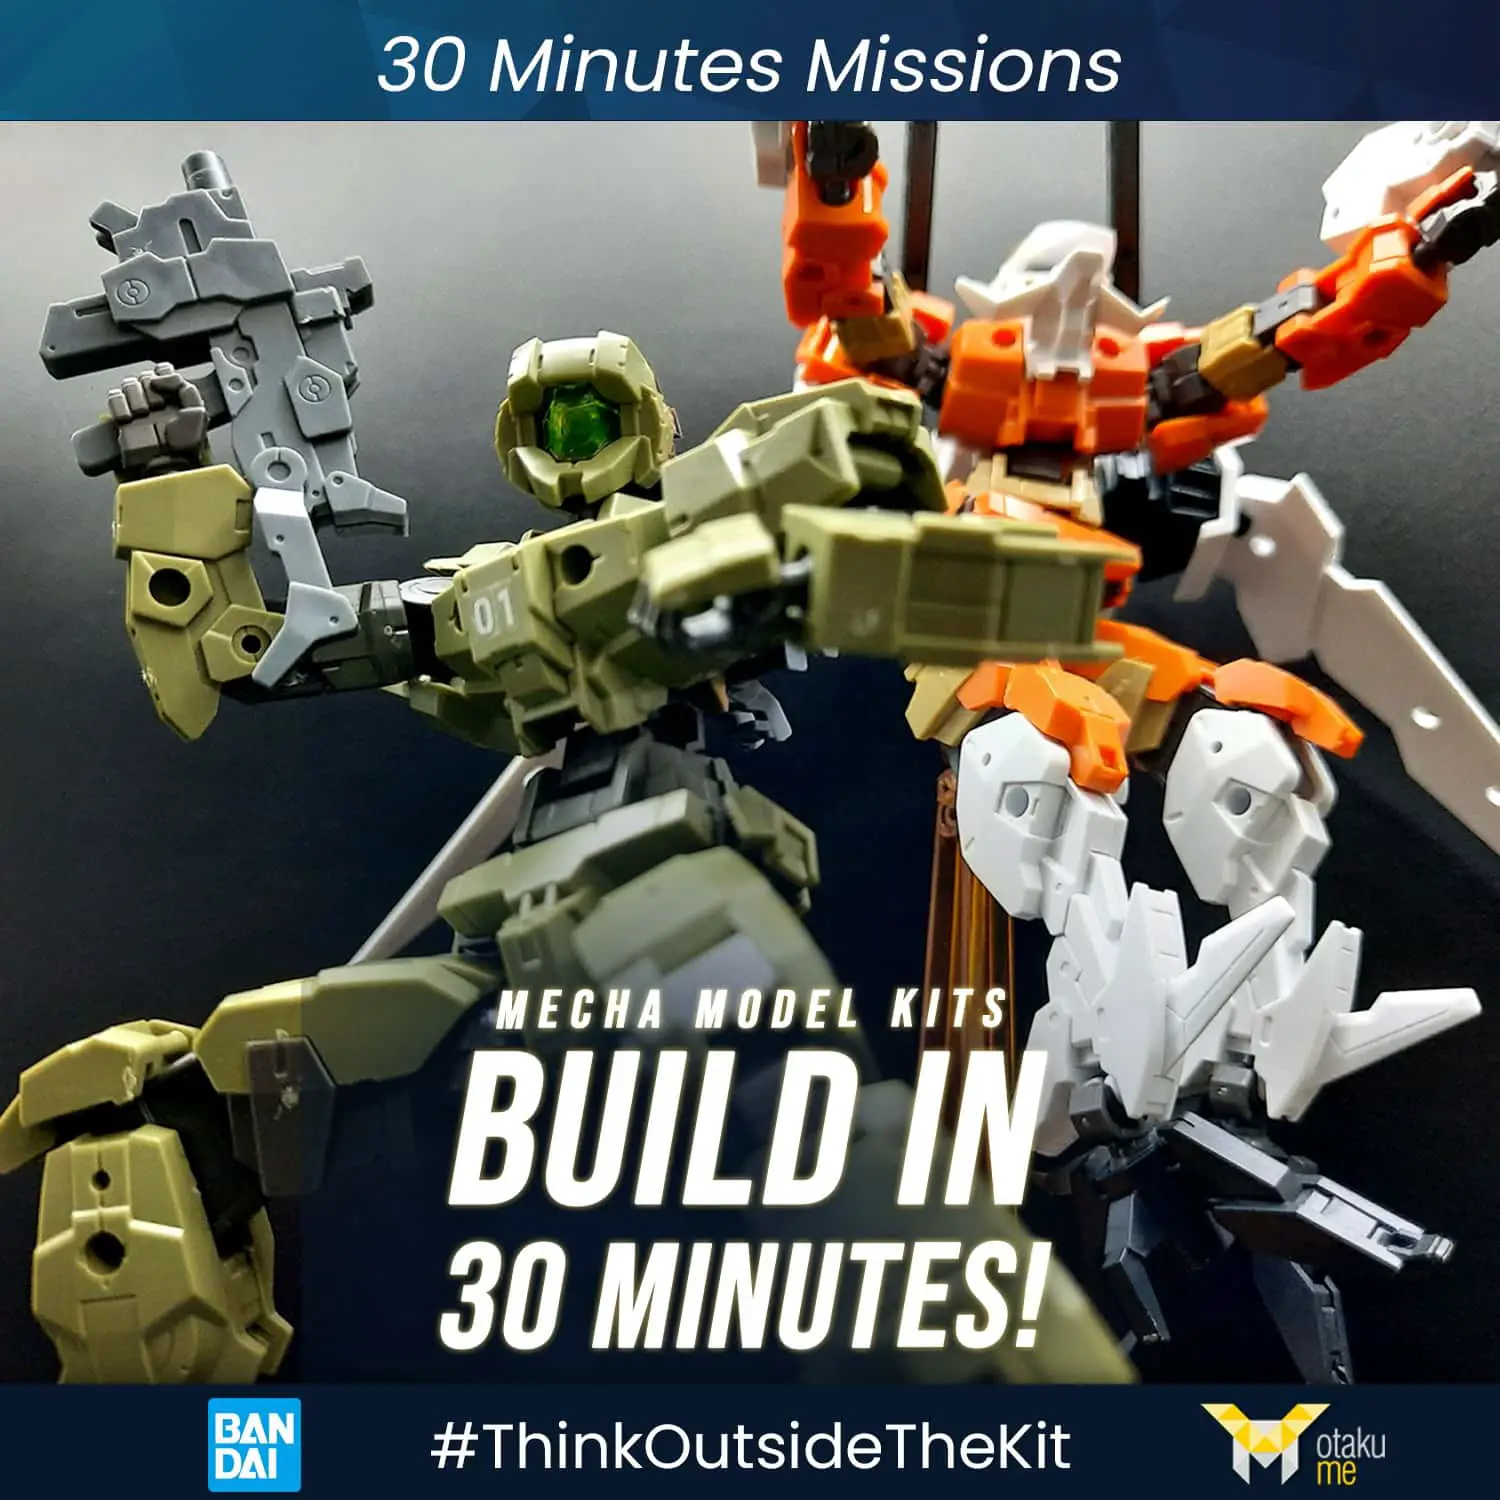 30 Minutes Missions!